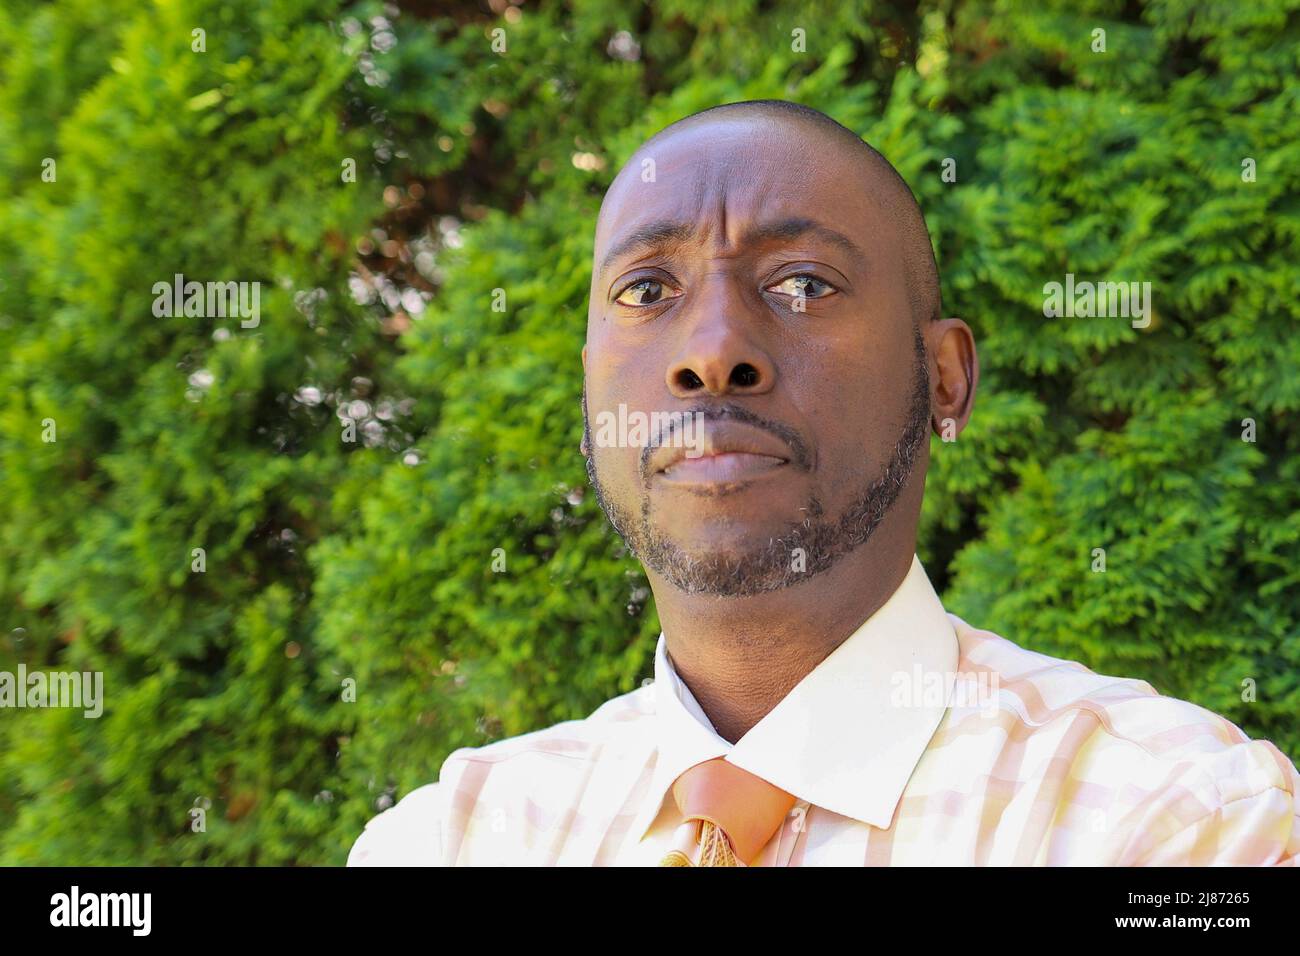 A portrait of a black African-American man looking serious and confident Stock Photo